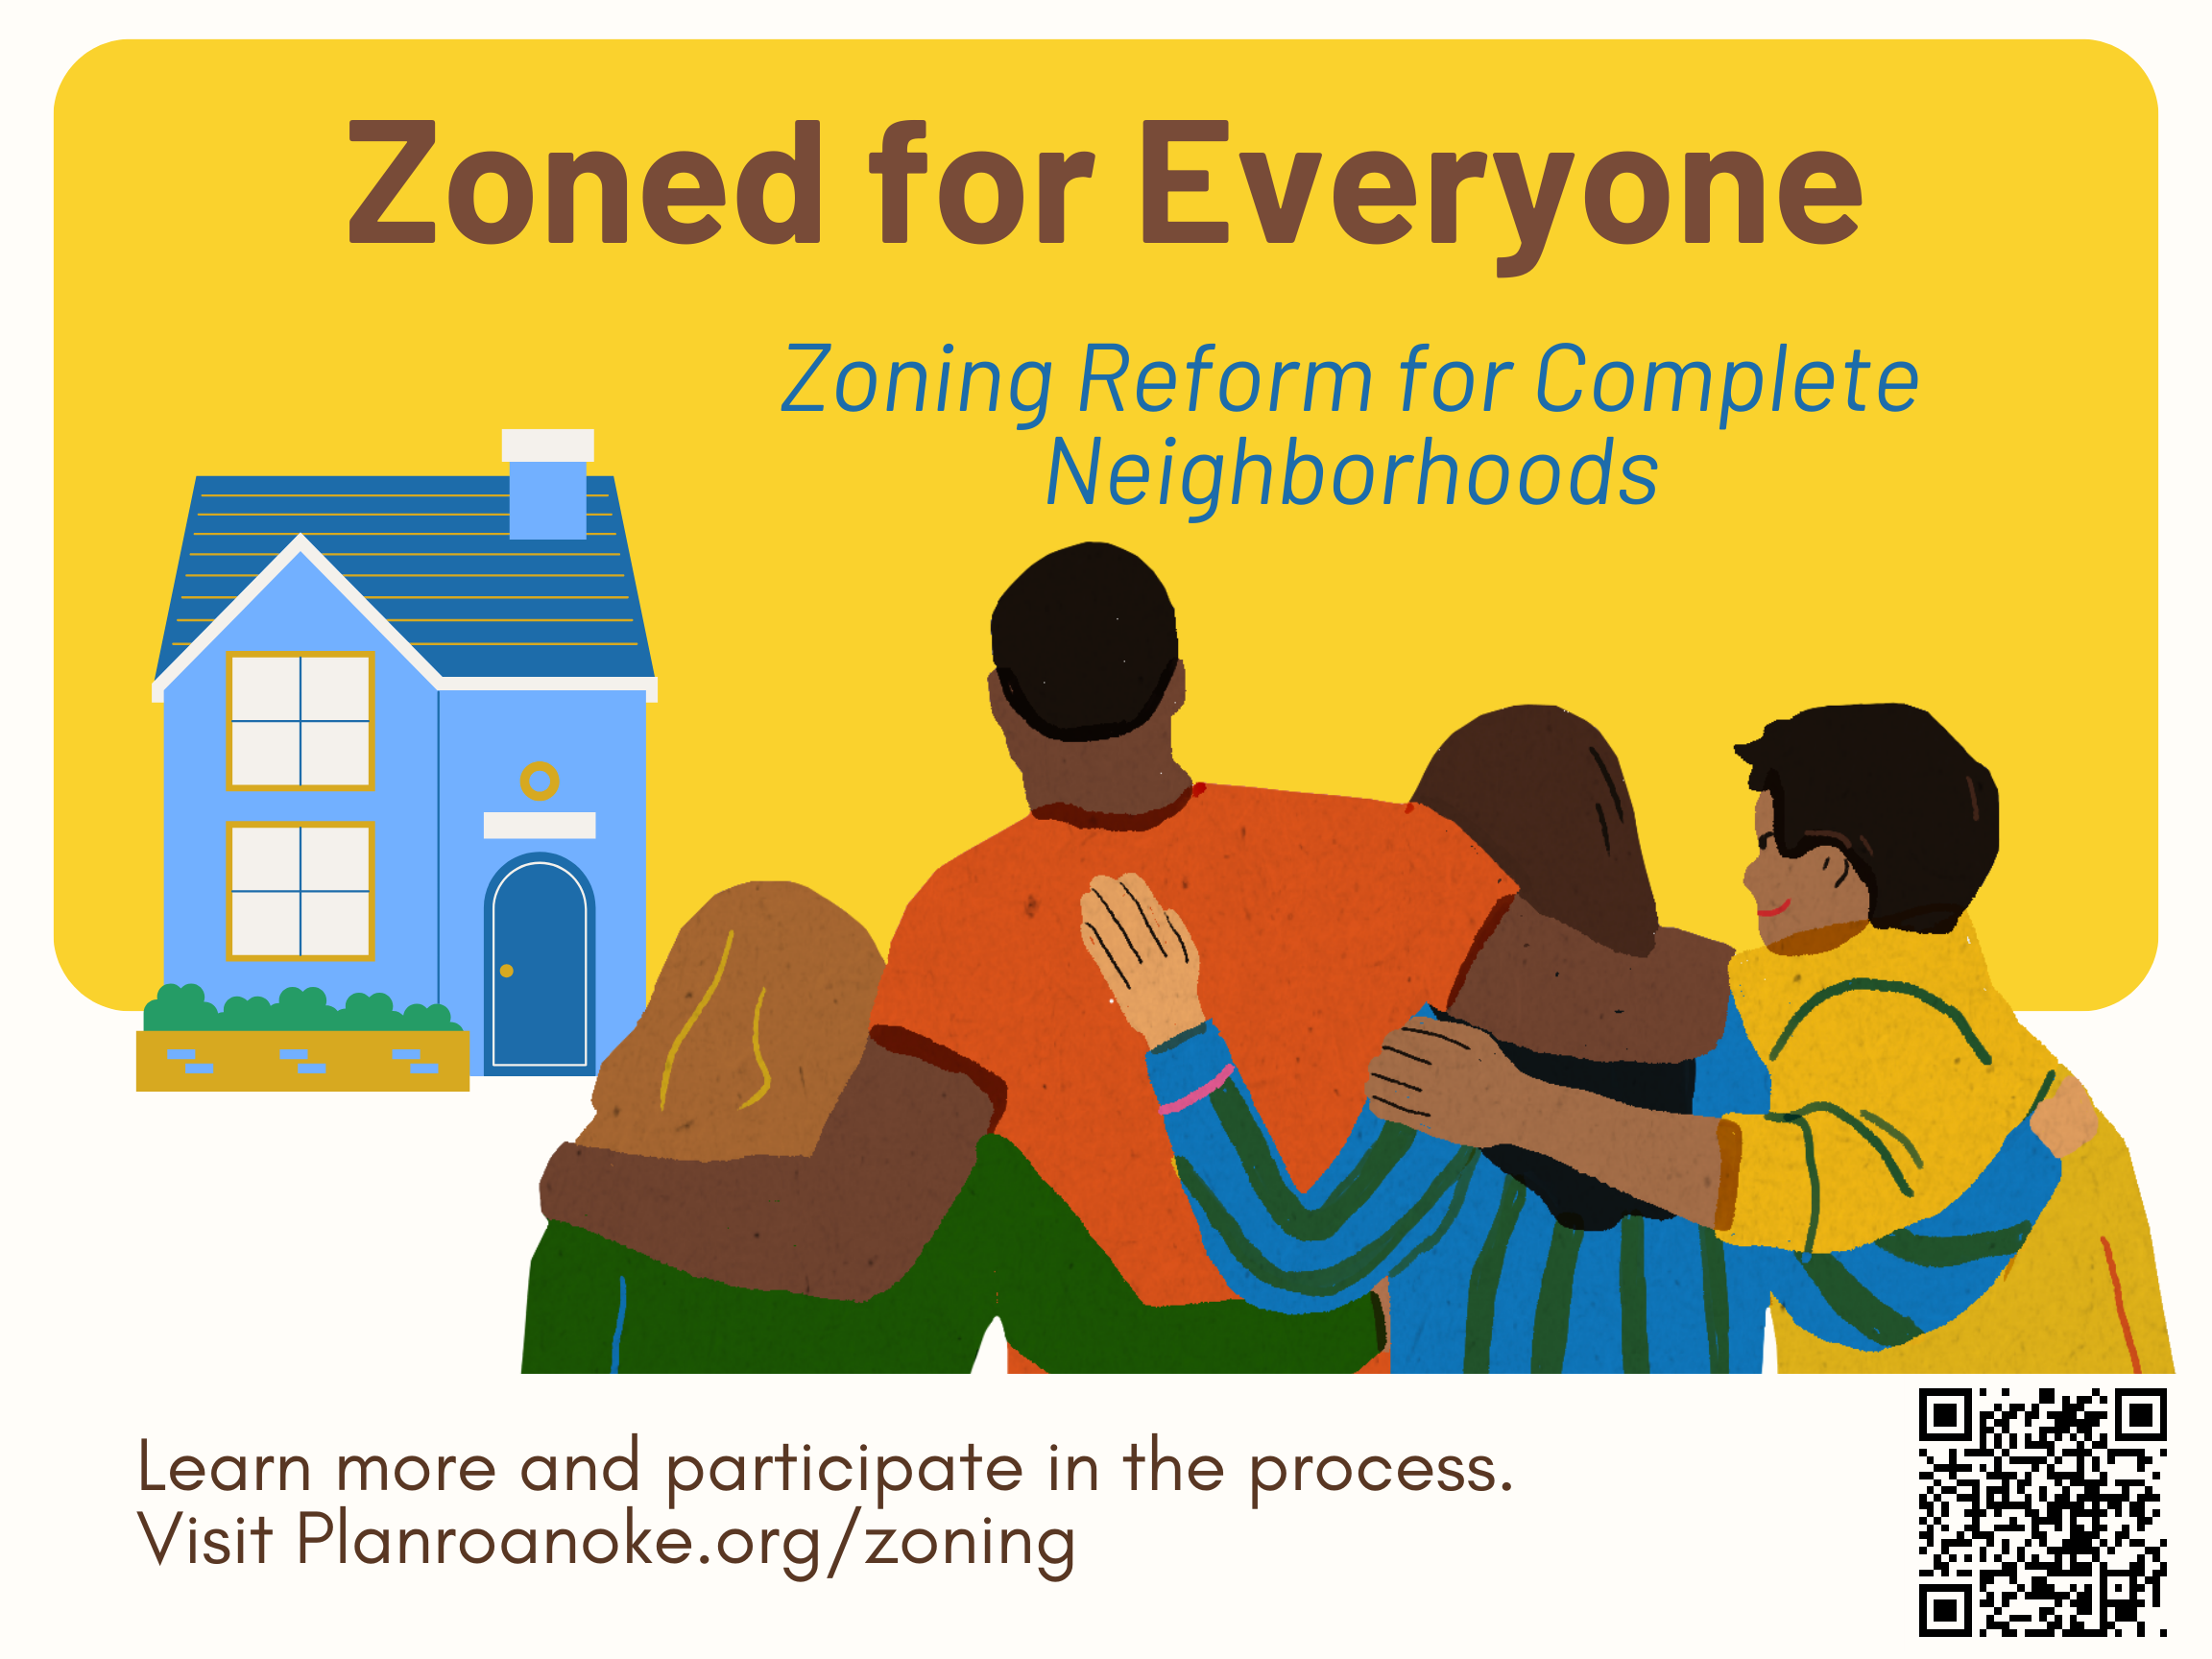 Group of people with text stating "zoned for everyone". Bottom of image includes a url and qr code for planroanoke.org/zoning